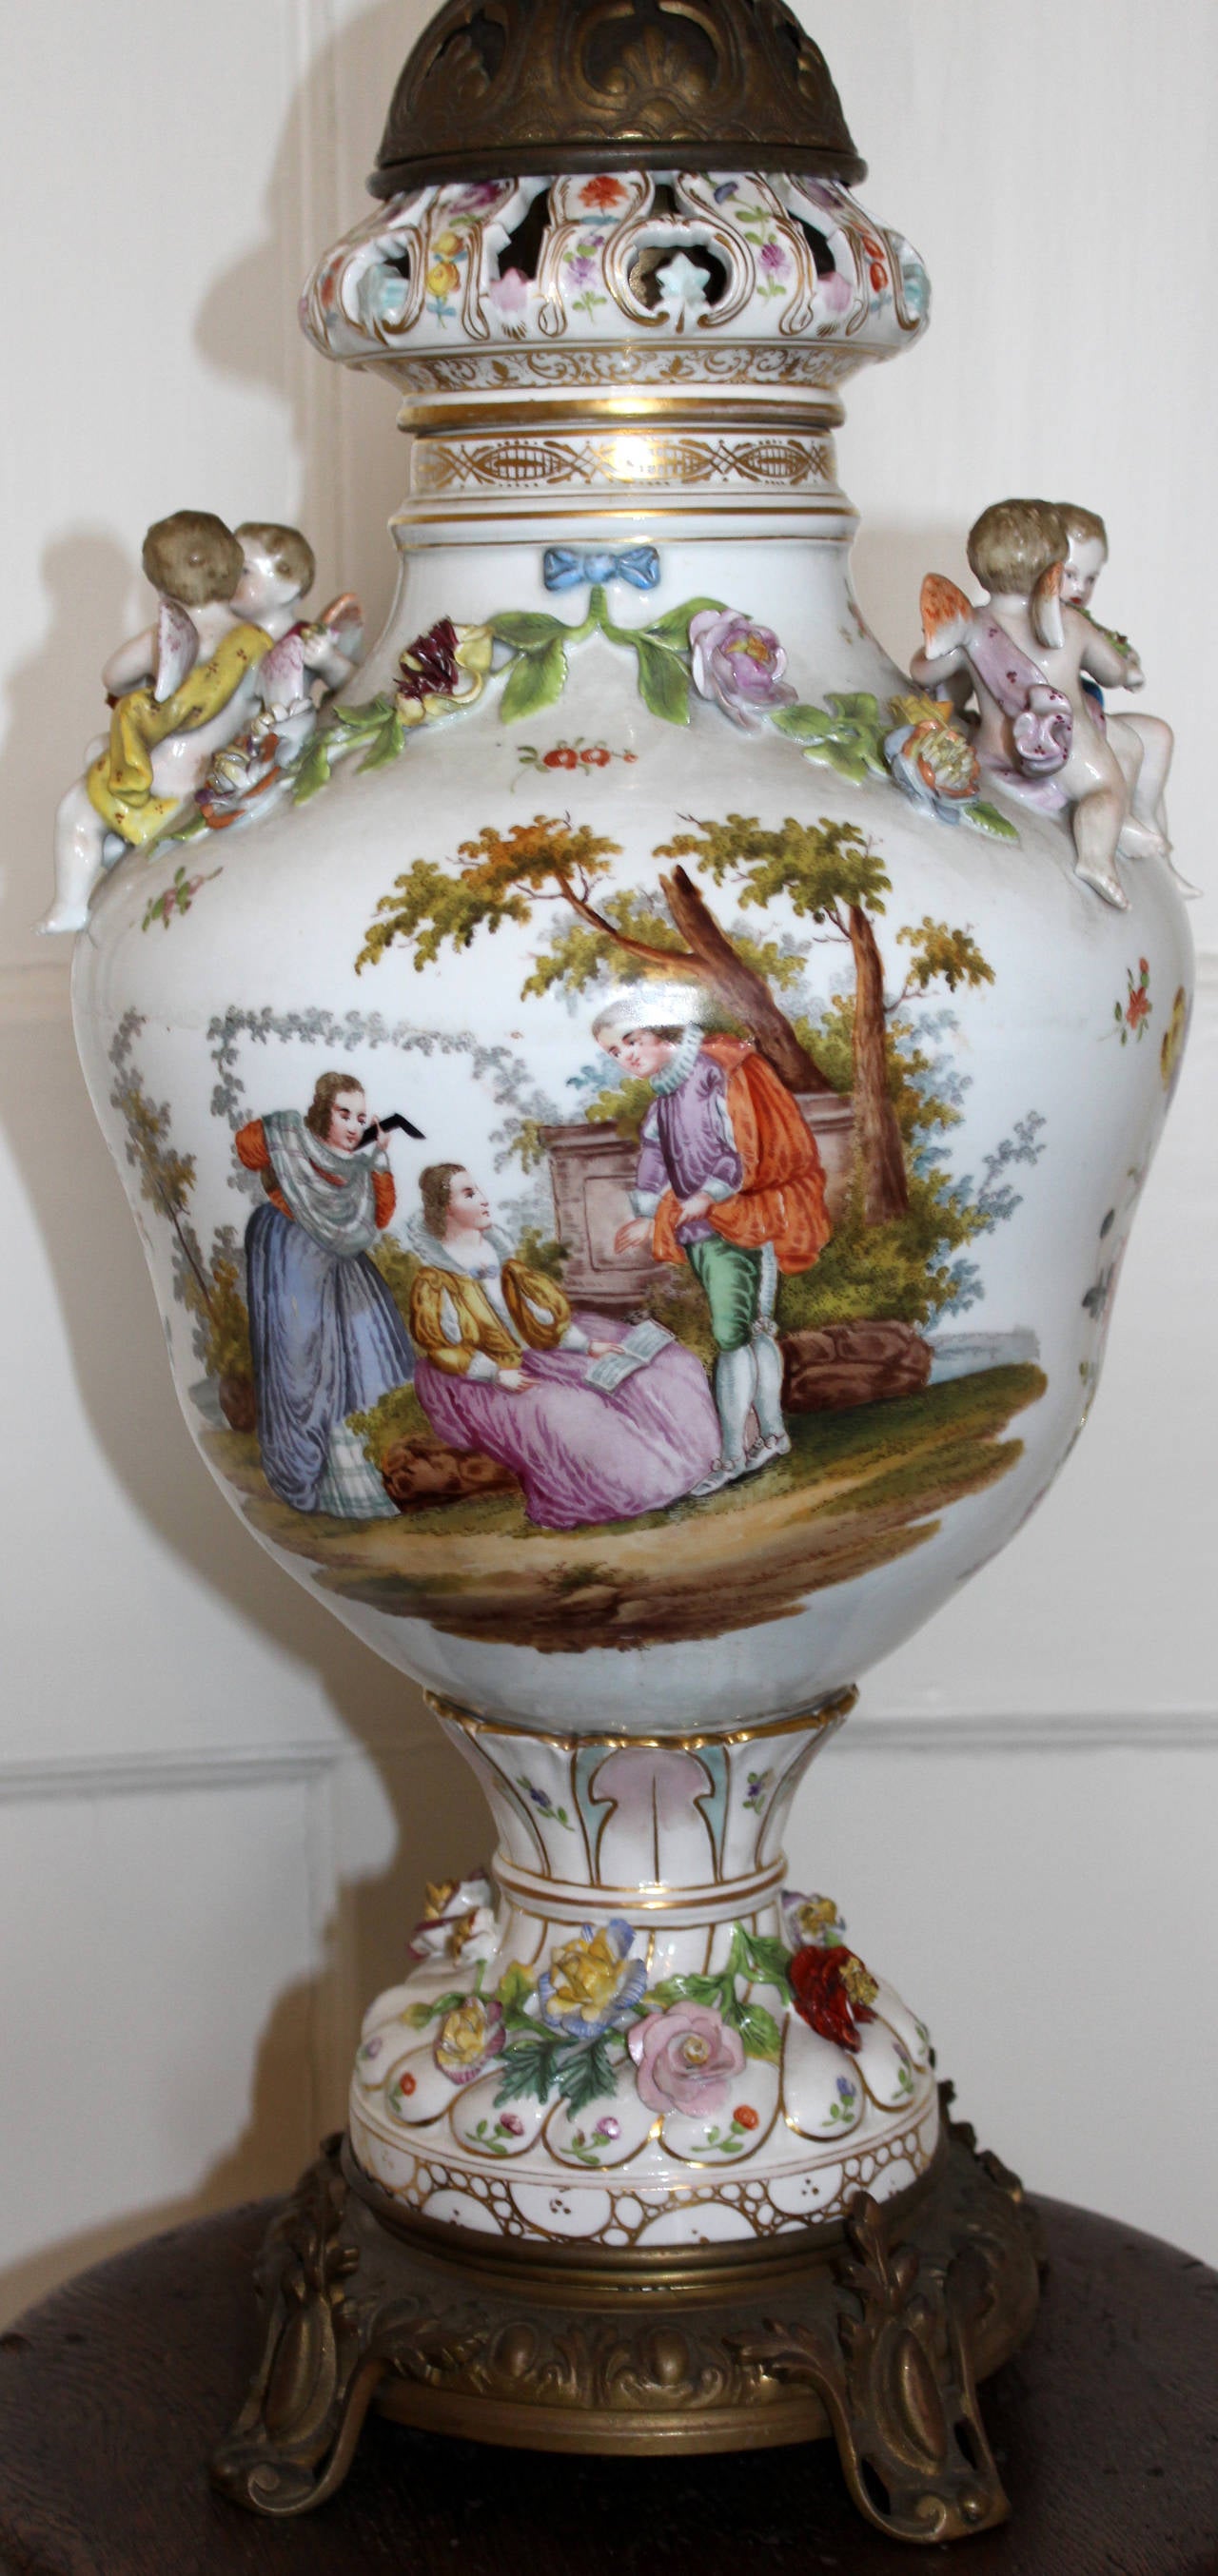 Meissen table lamp with applied cherubs, floral swags and decorations. Hand painted decoration depicts figures in a classical setting reading and playing music. Decorative brass footed base and fixture.